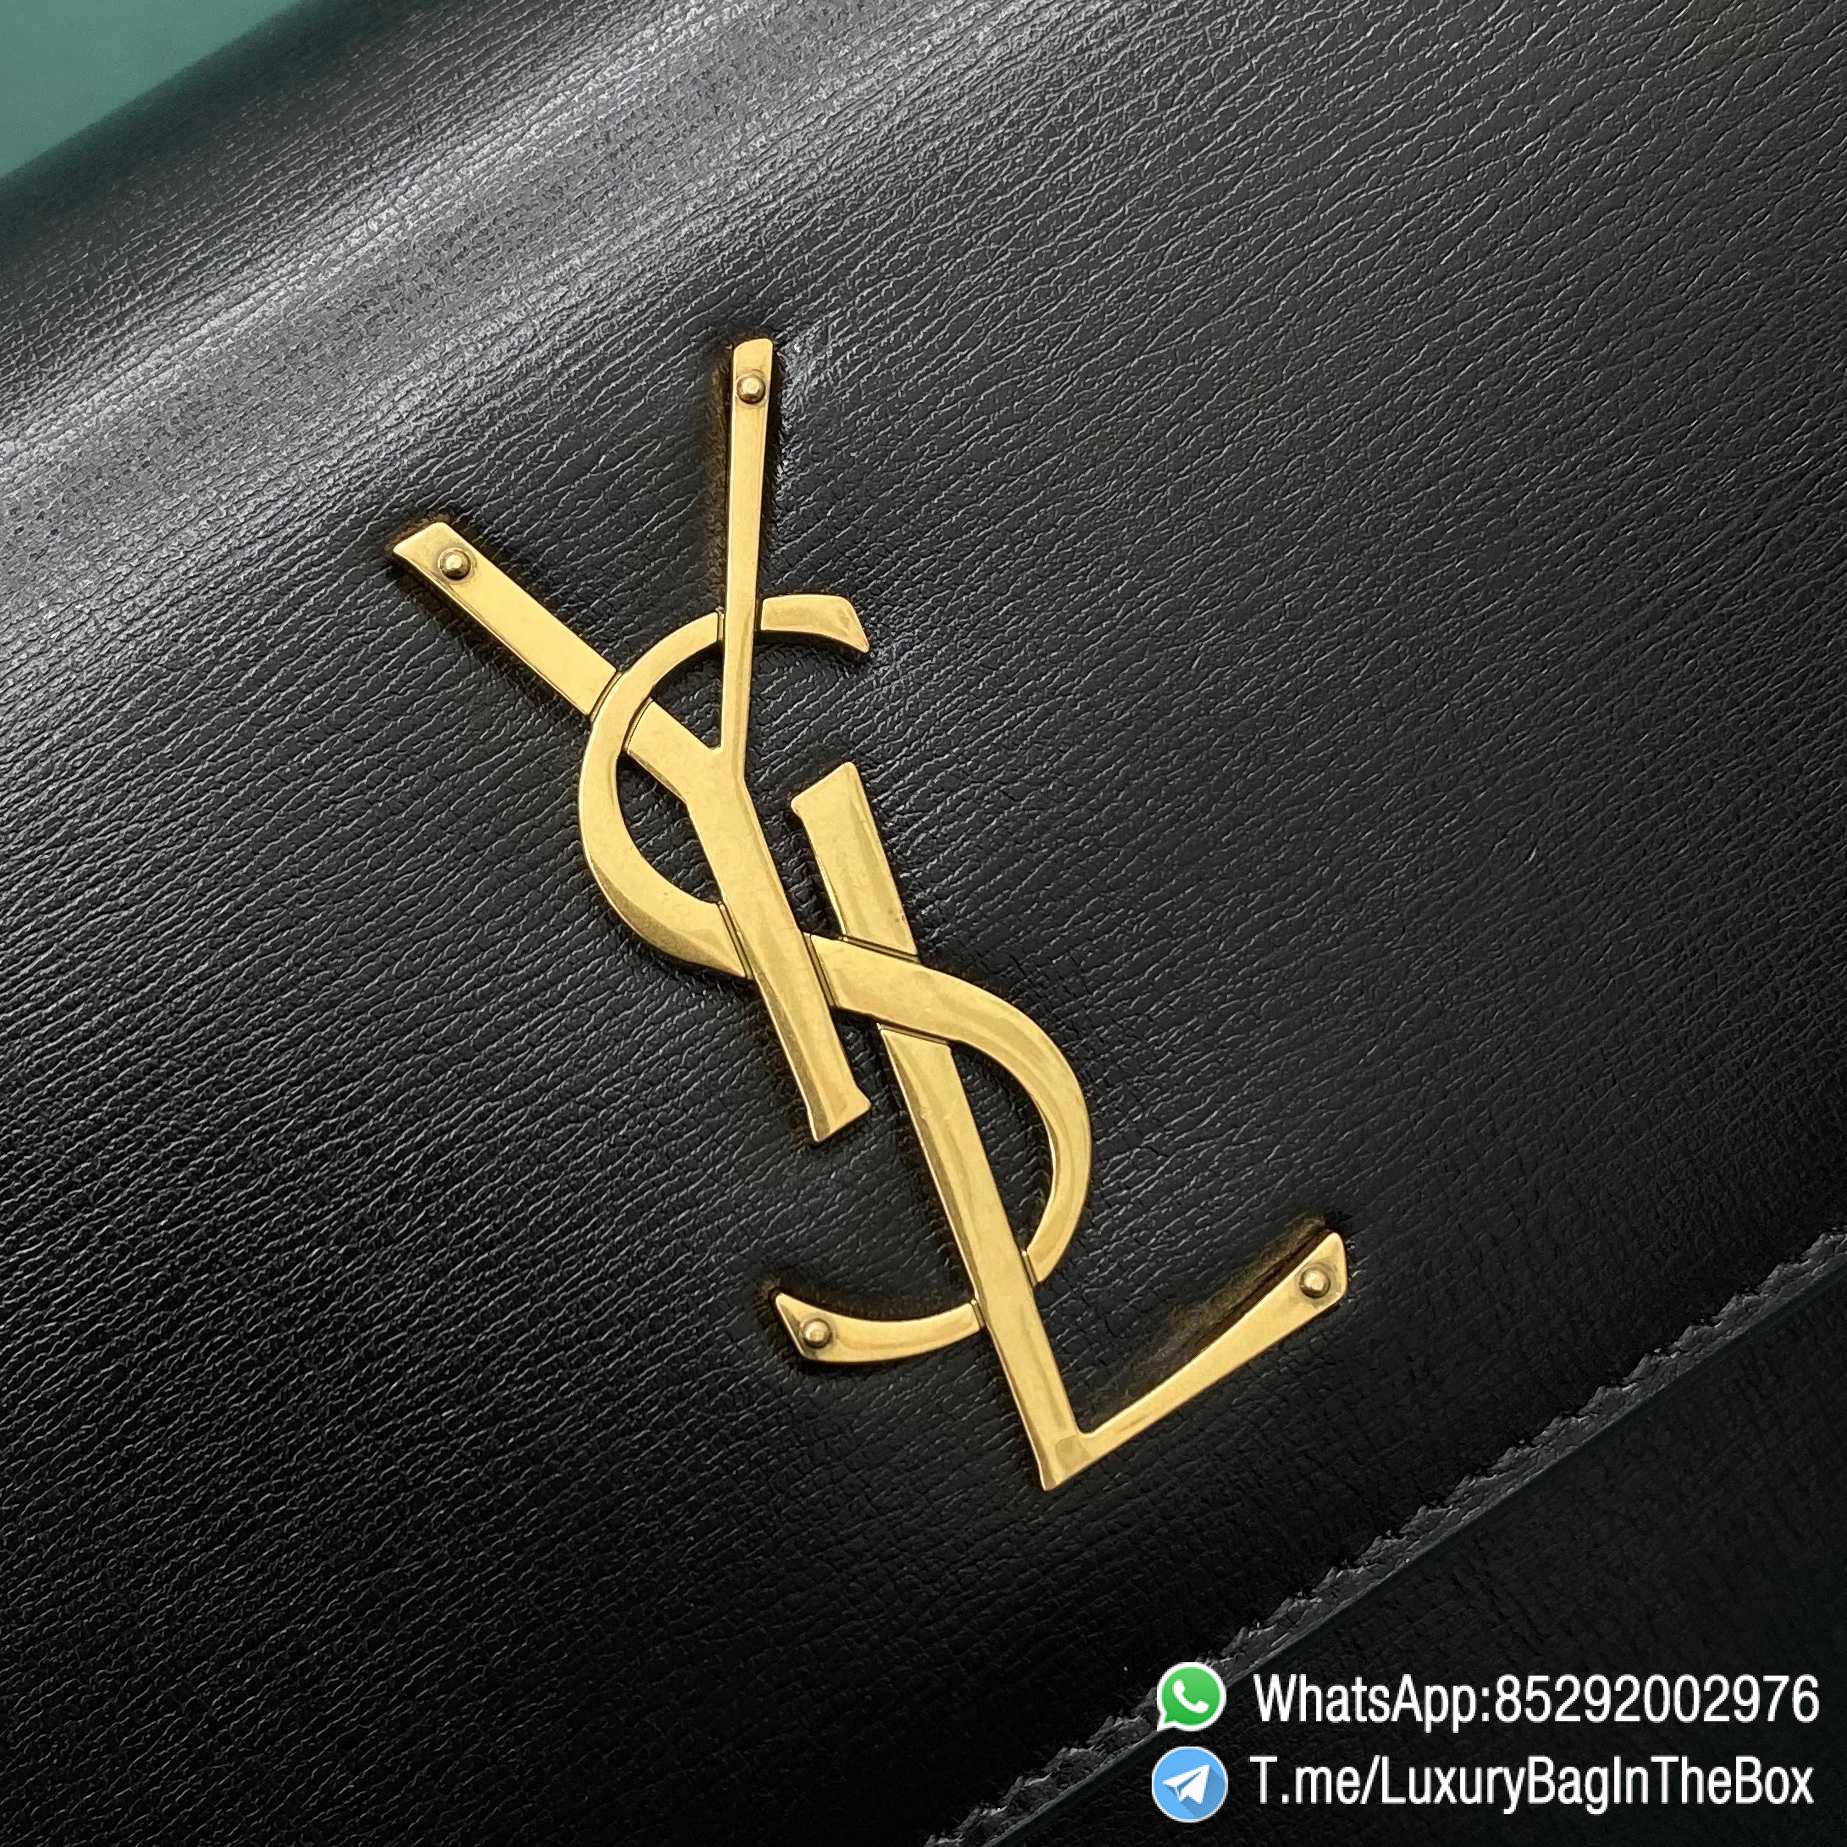 SAINT LAURENT MONOGRAM BAG YSL SUNSET MEDIUM IN SMOOTH LEATHER FRONT FLAP CHAIN AND LEATHER SHOULDER STRAP YSL BRONZE METAL HARDWARE STYLE ID 442906D420W1000 06